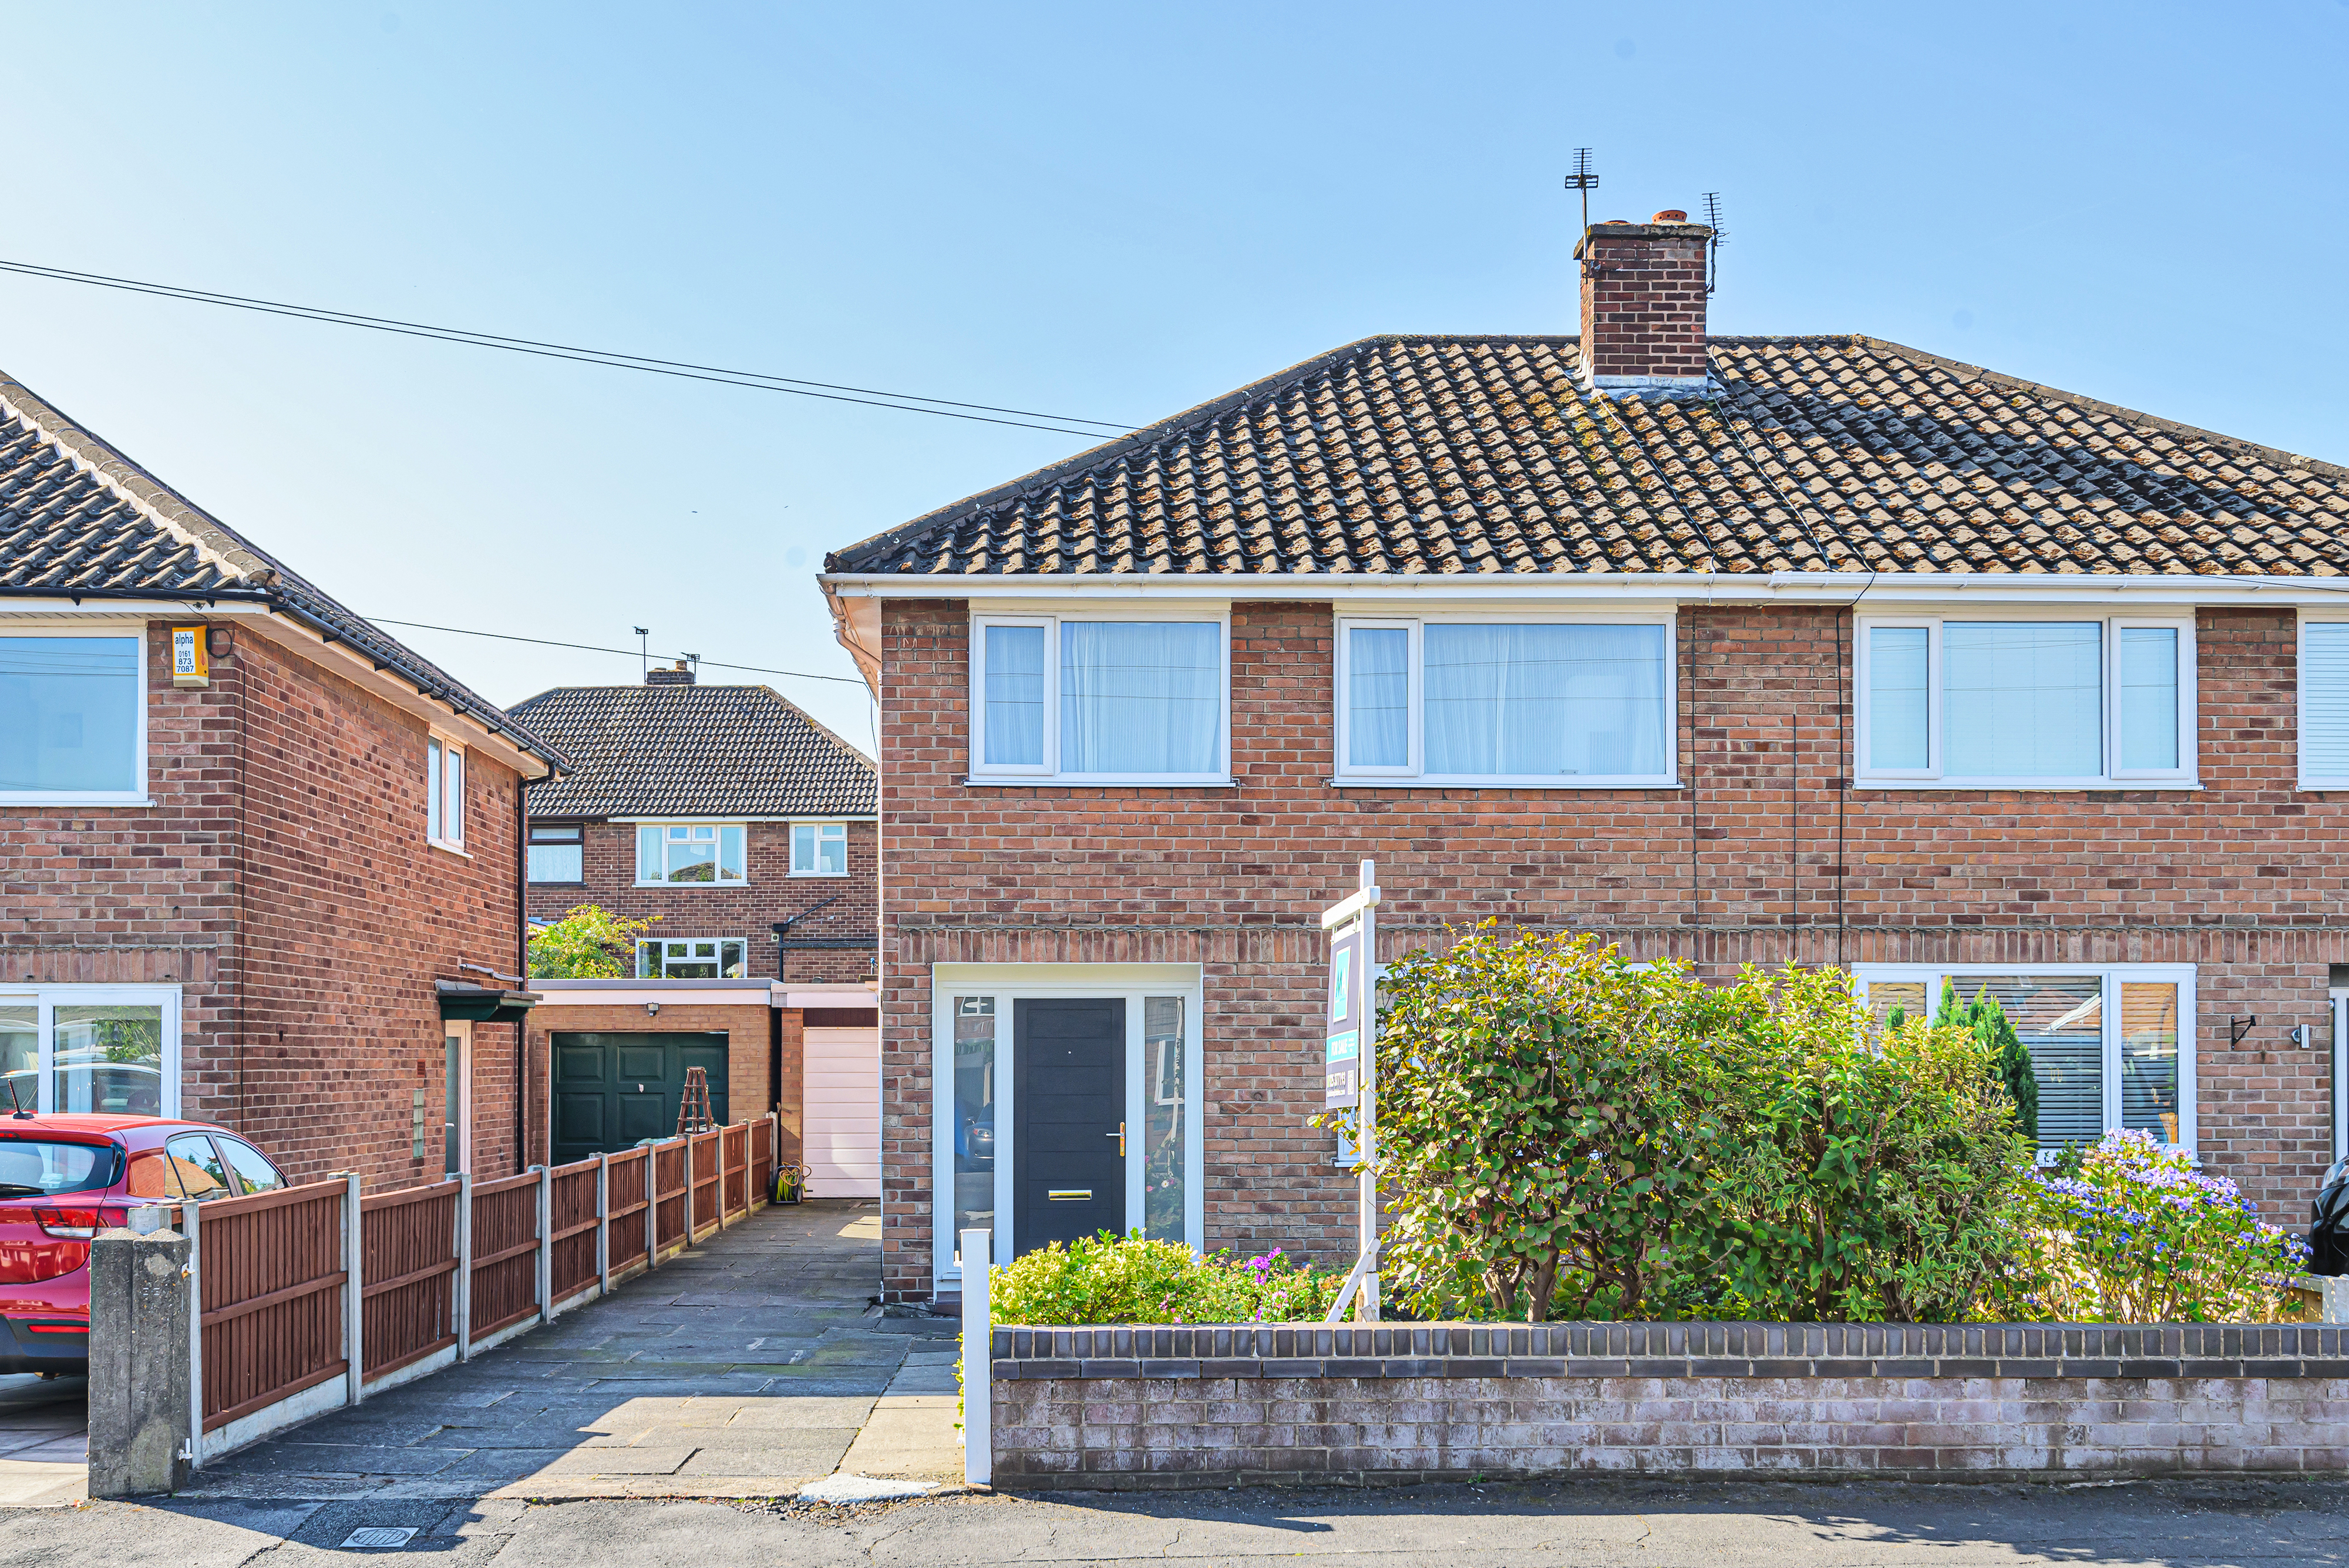 Selworthy Drive, Thelwall, Warrington